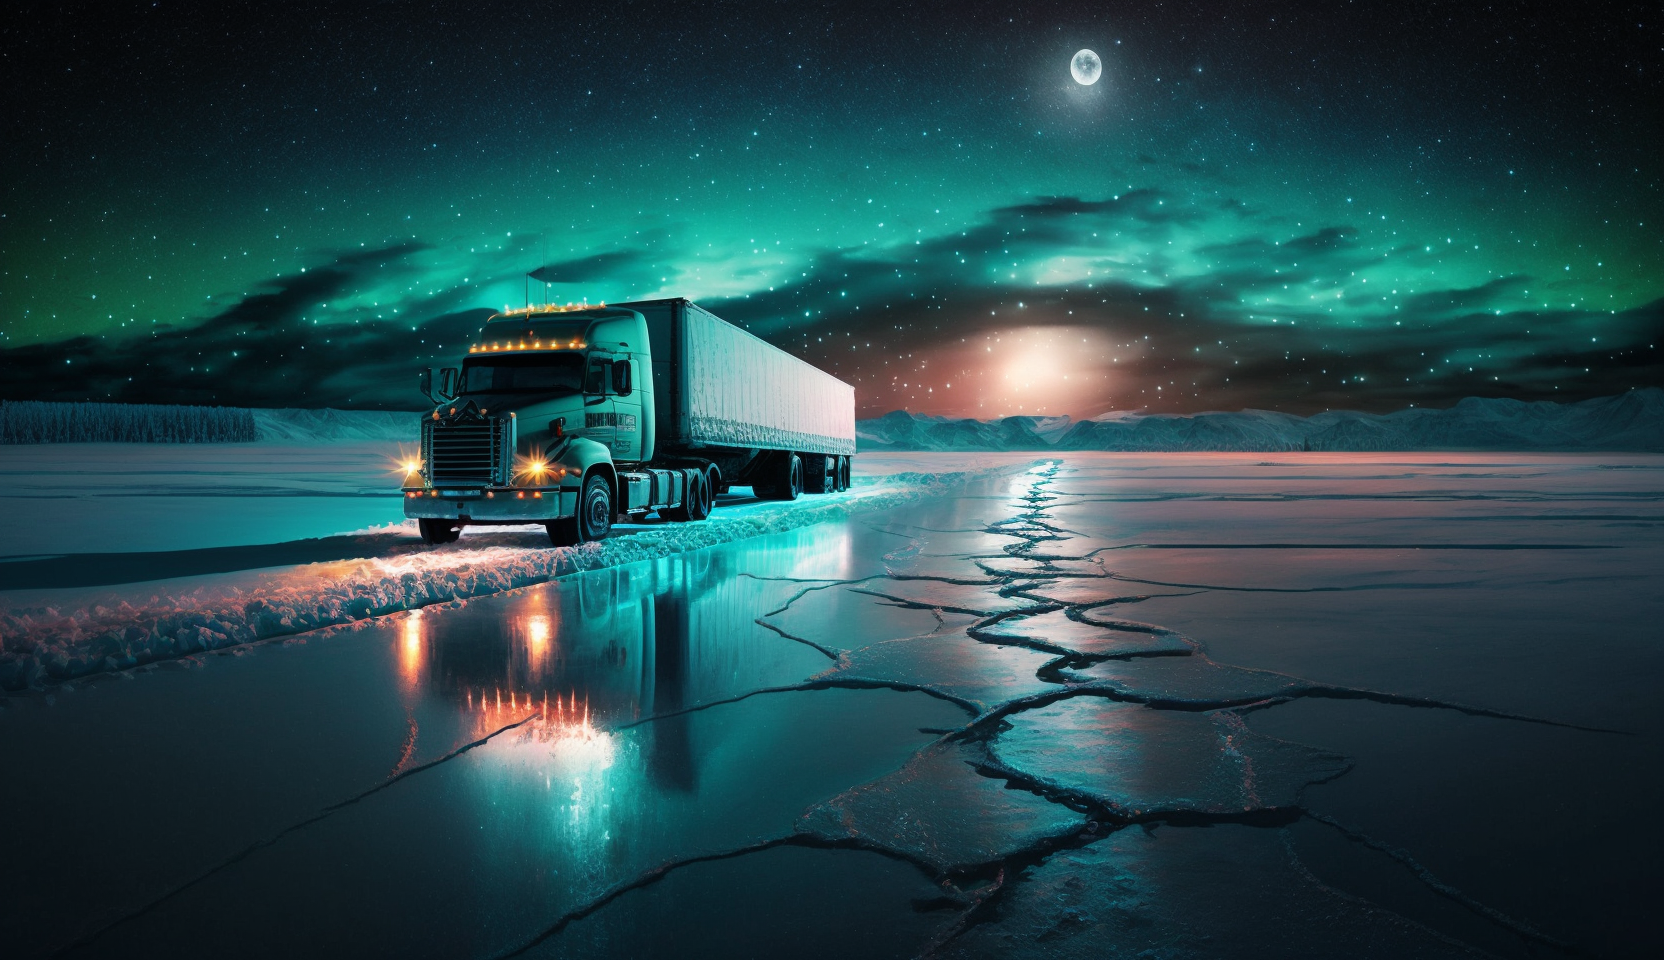 artistic image of semi truck traversing an ice road at night